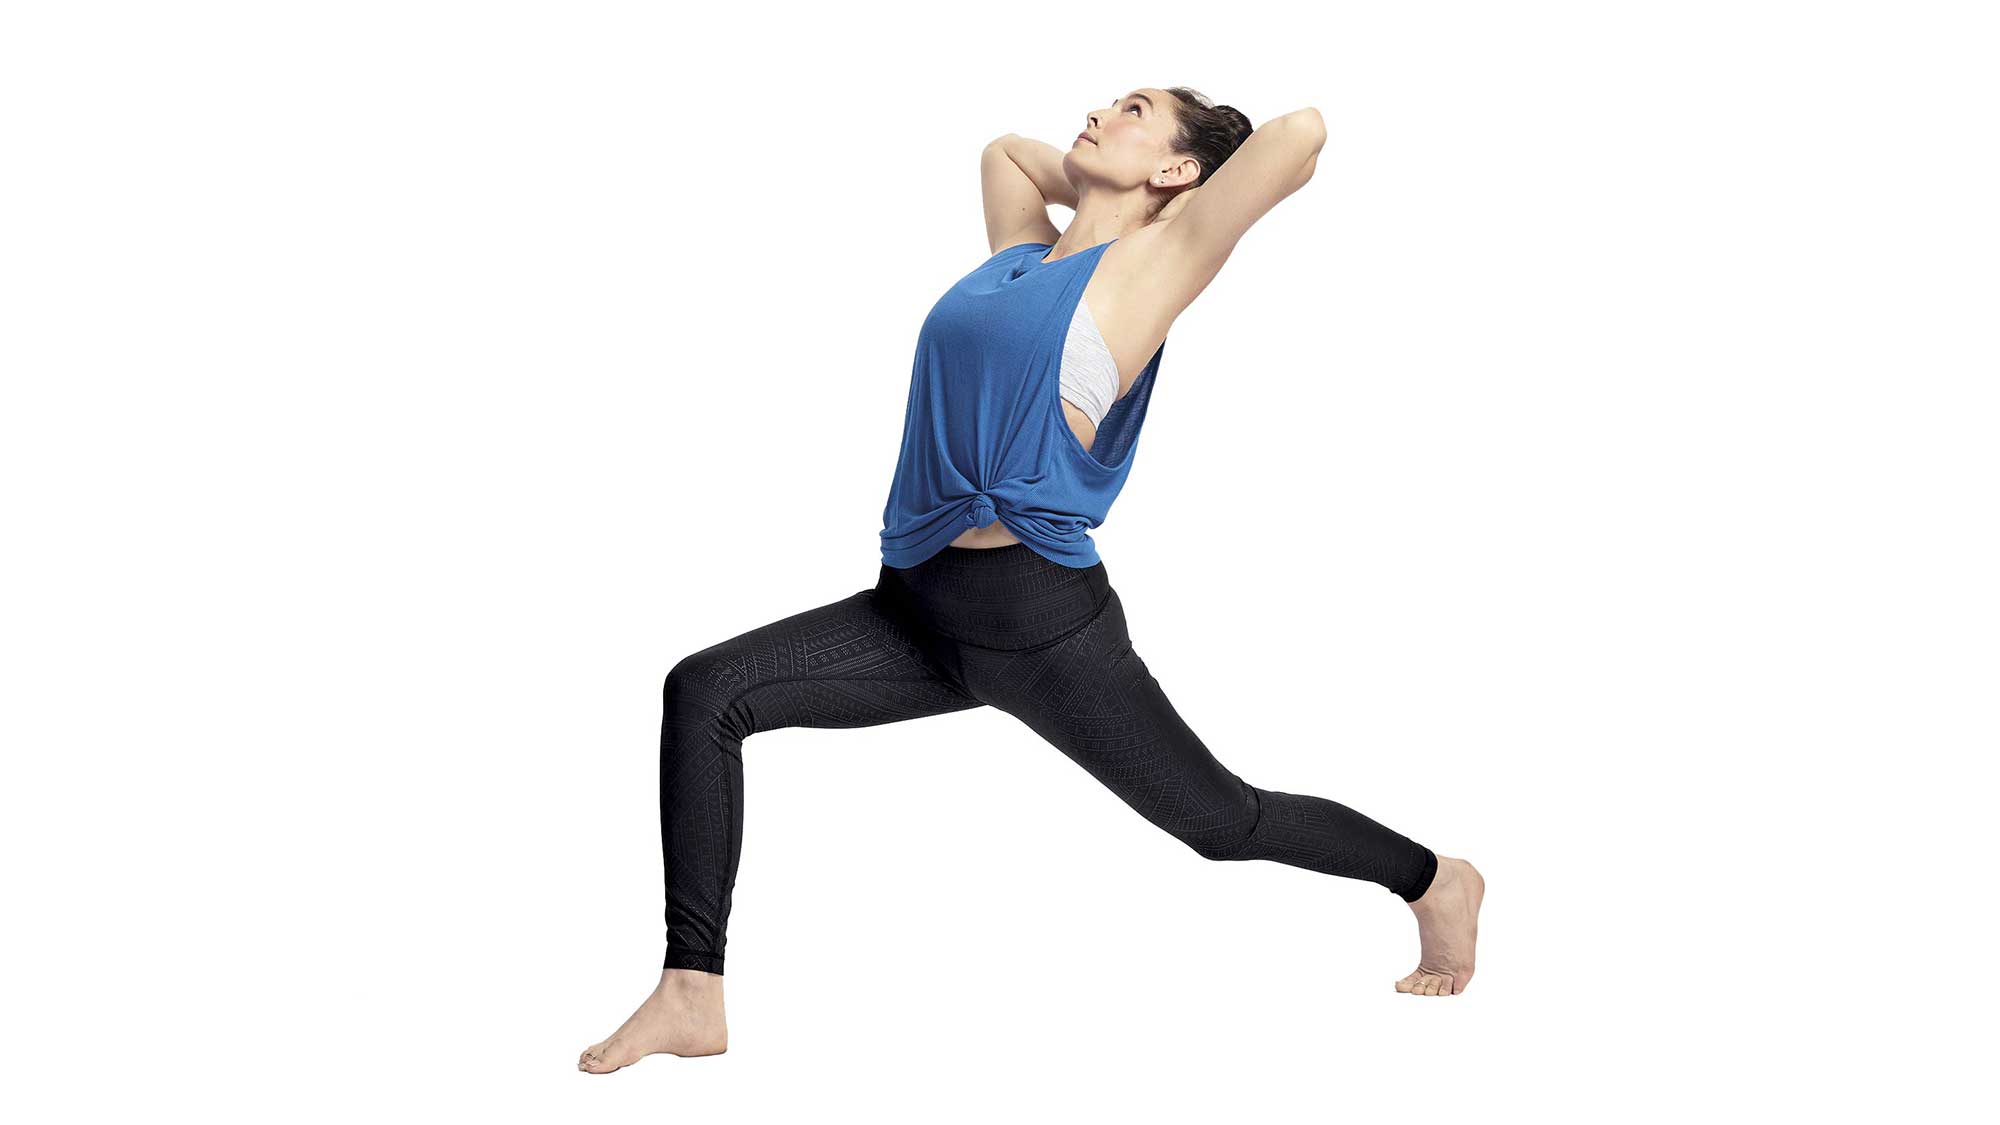 Yoga Poses to Improve your Movement, Body, Breathing and Wellbeing | BOXROX